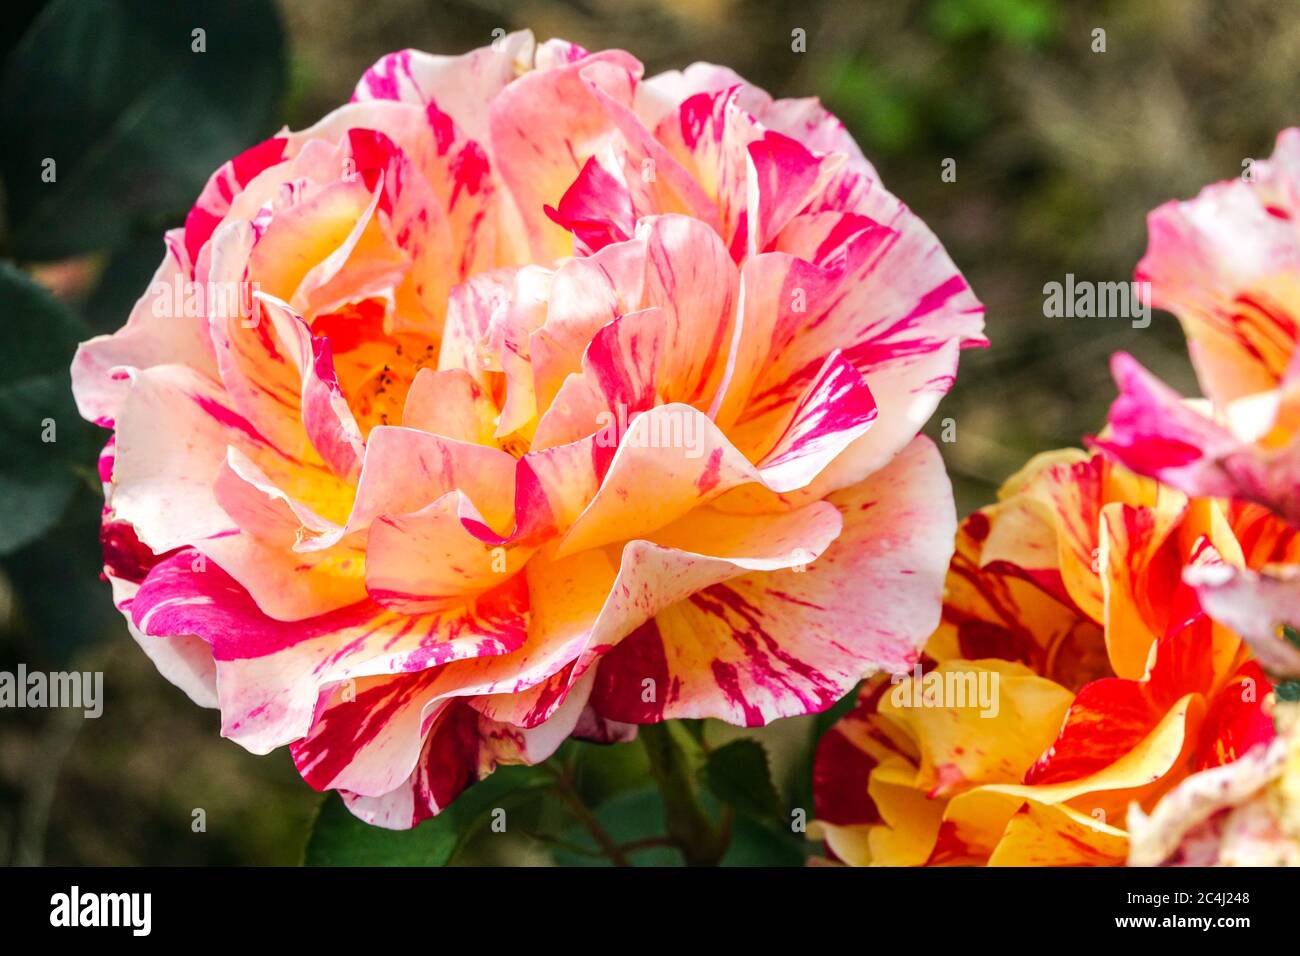 Rose Rosa Maurice Utrillo Large blooms rose blooms Stock Photo